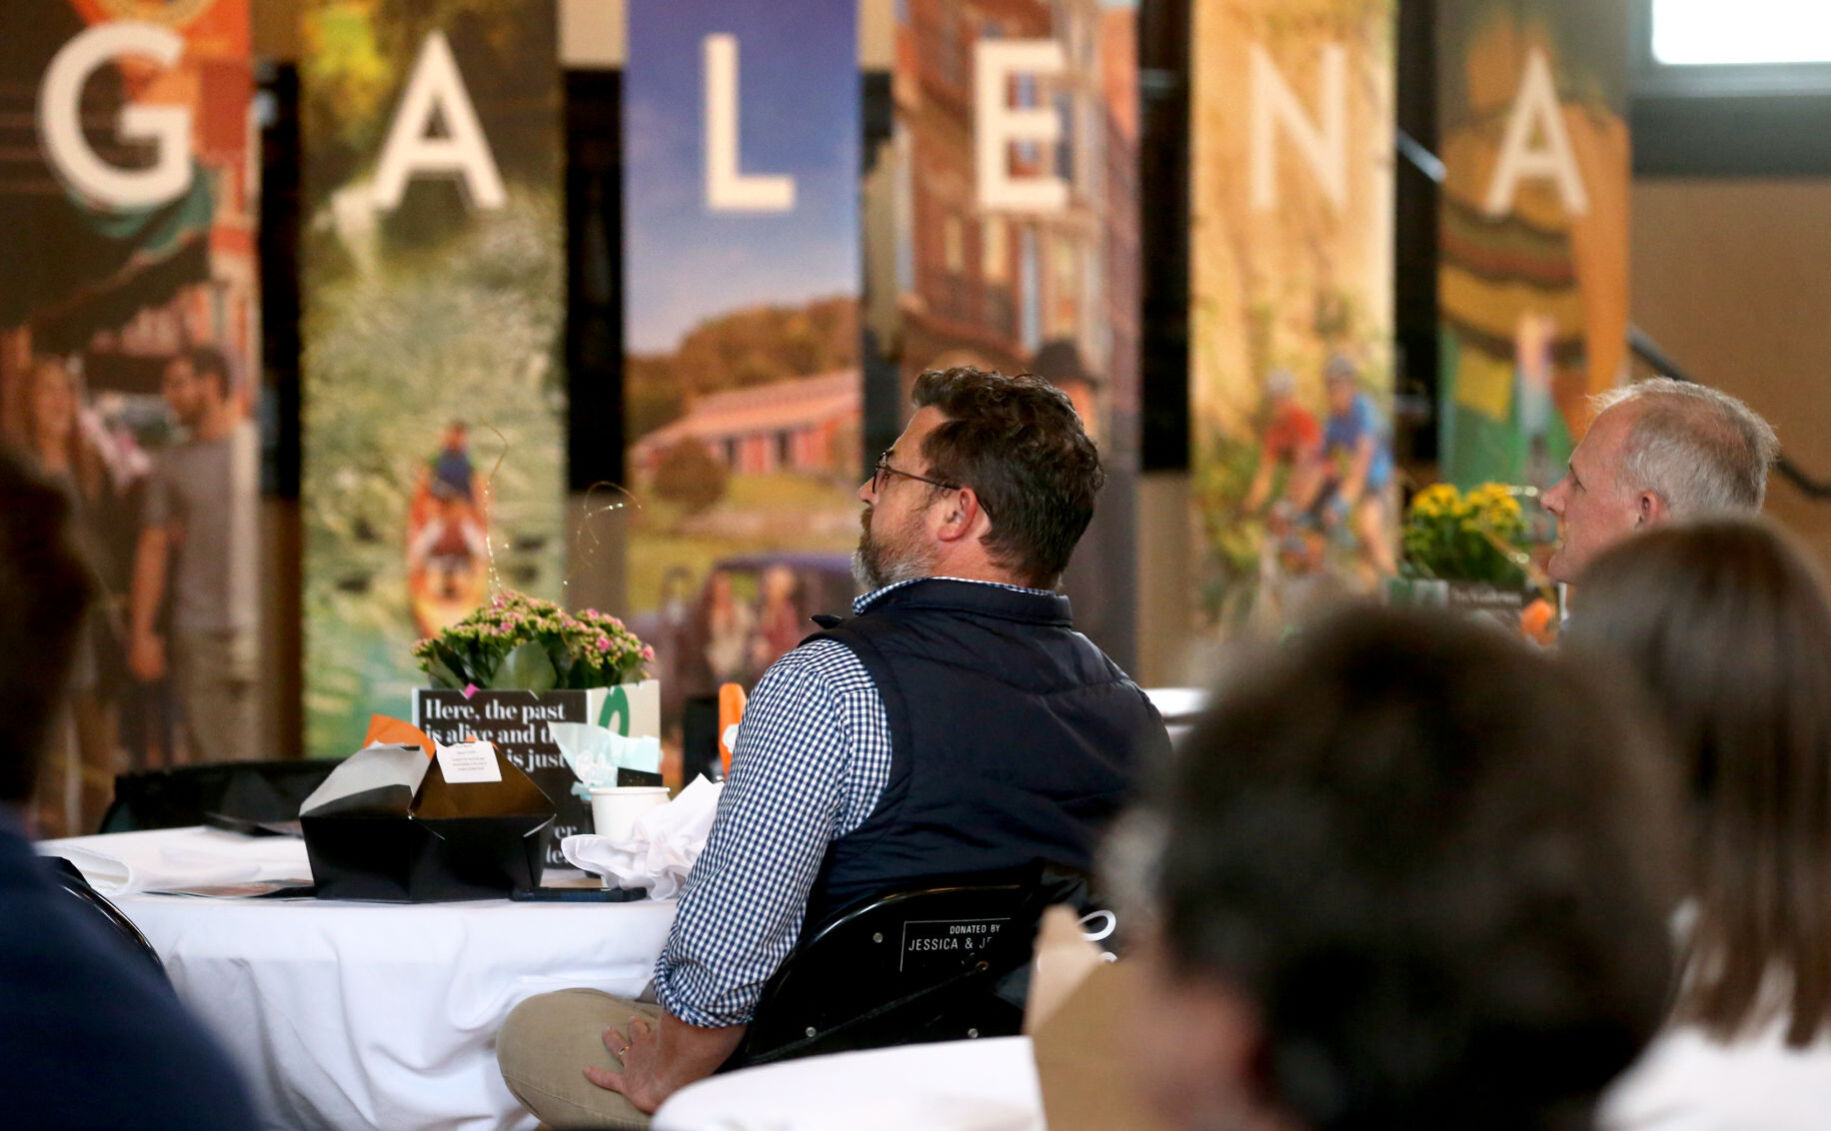 People attend the Galena Country Tourism luncheon at Turner Hall in Galena, Ill., on Tuesday, May 3, 2022.    PHOTO CREDIT: JESSICA REILLY